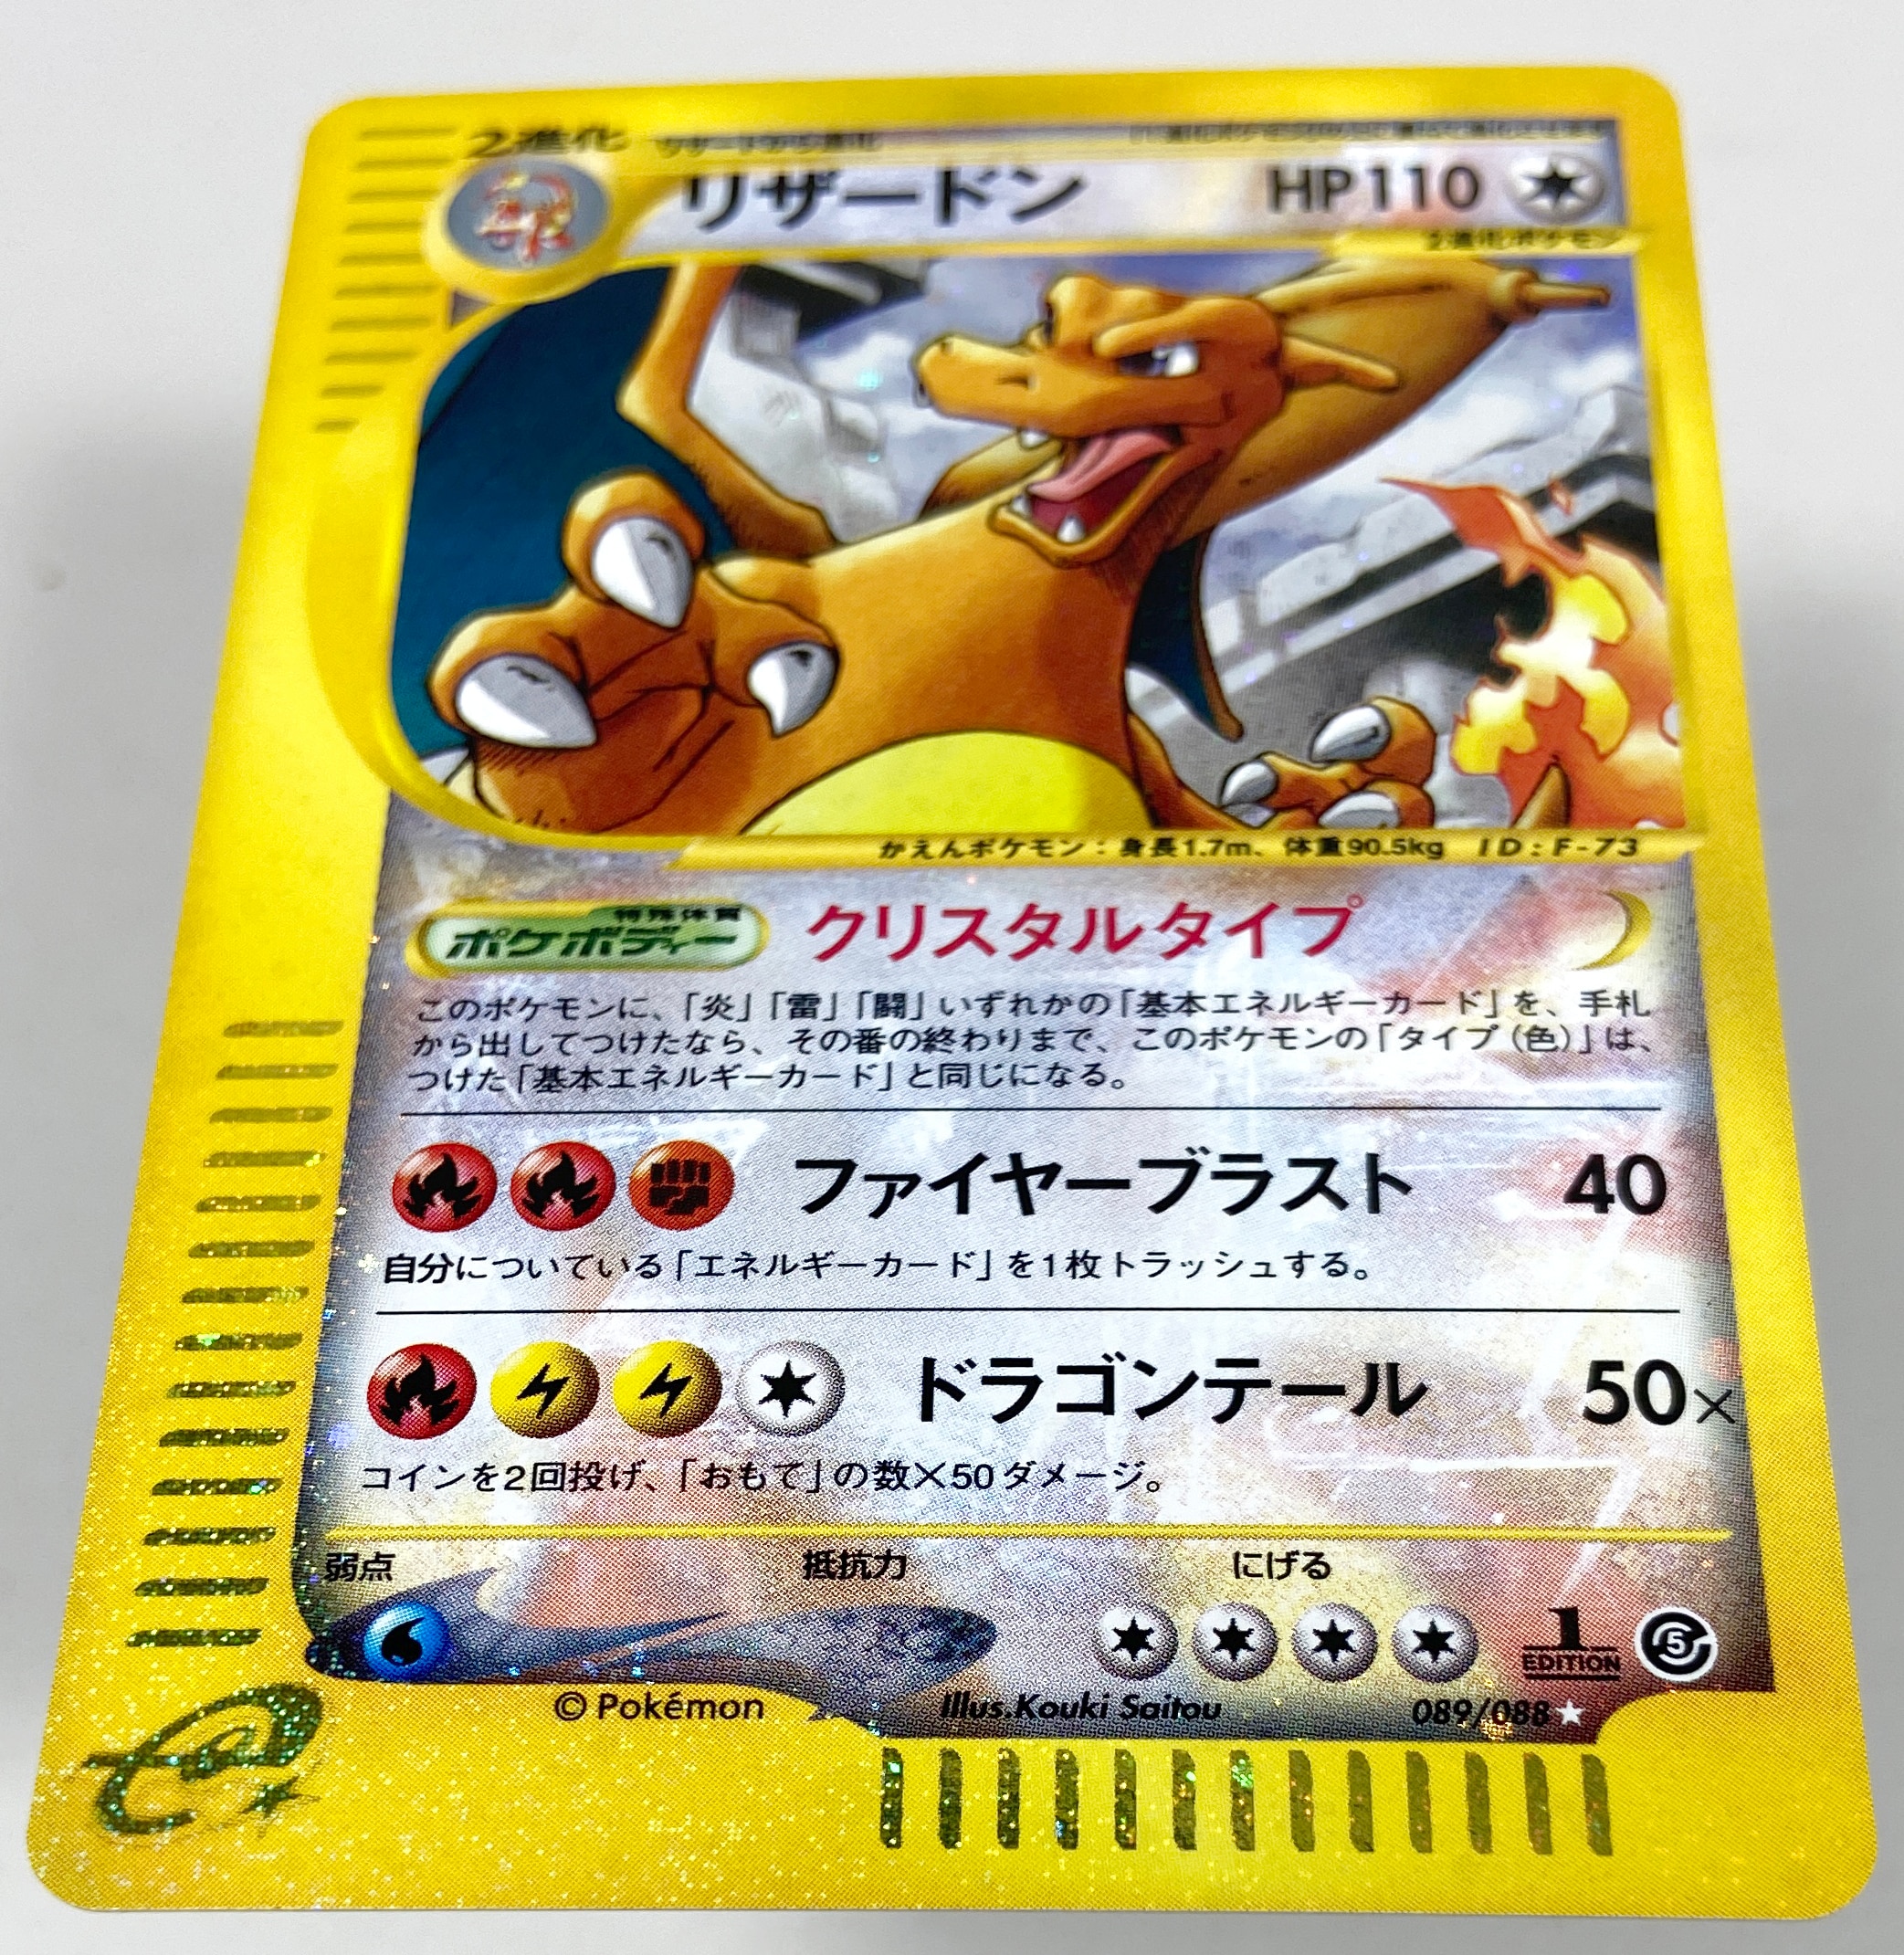  Ho-Oh GX 131/147 English Card Normal Size 2.5 x 3.5 in  Sleeve and Safe Box Ultra Flashy Card Free 1 EX Random in Pack : Office  Products